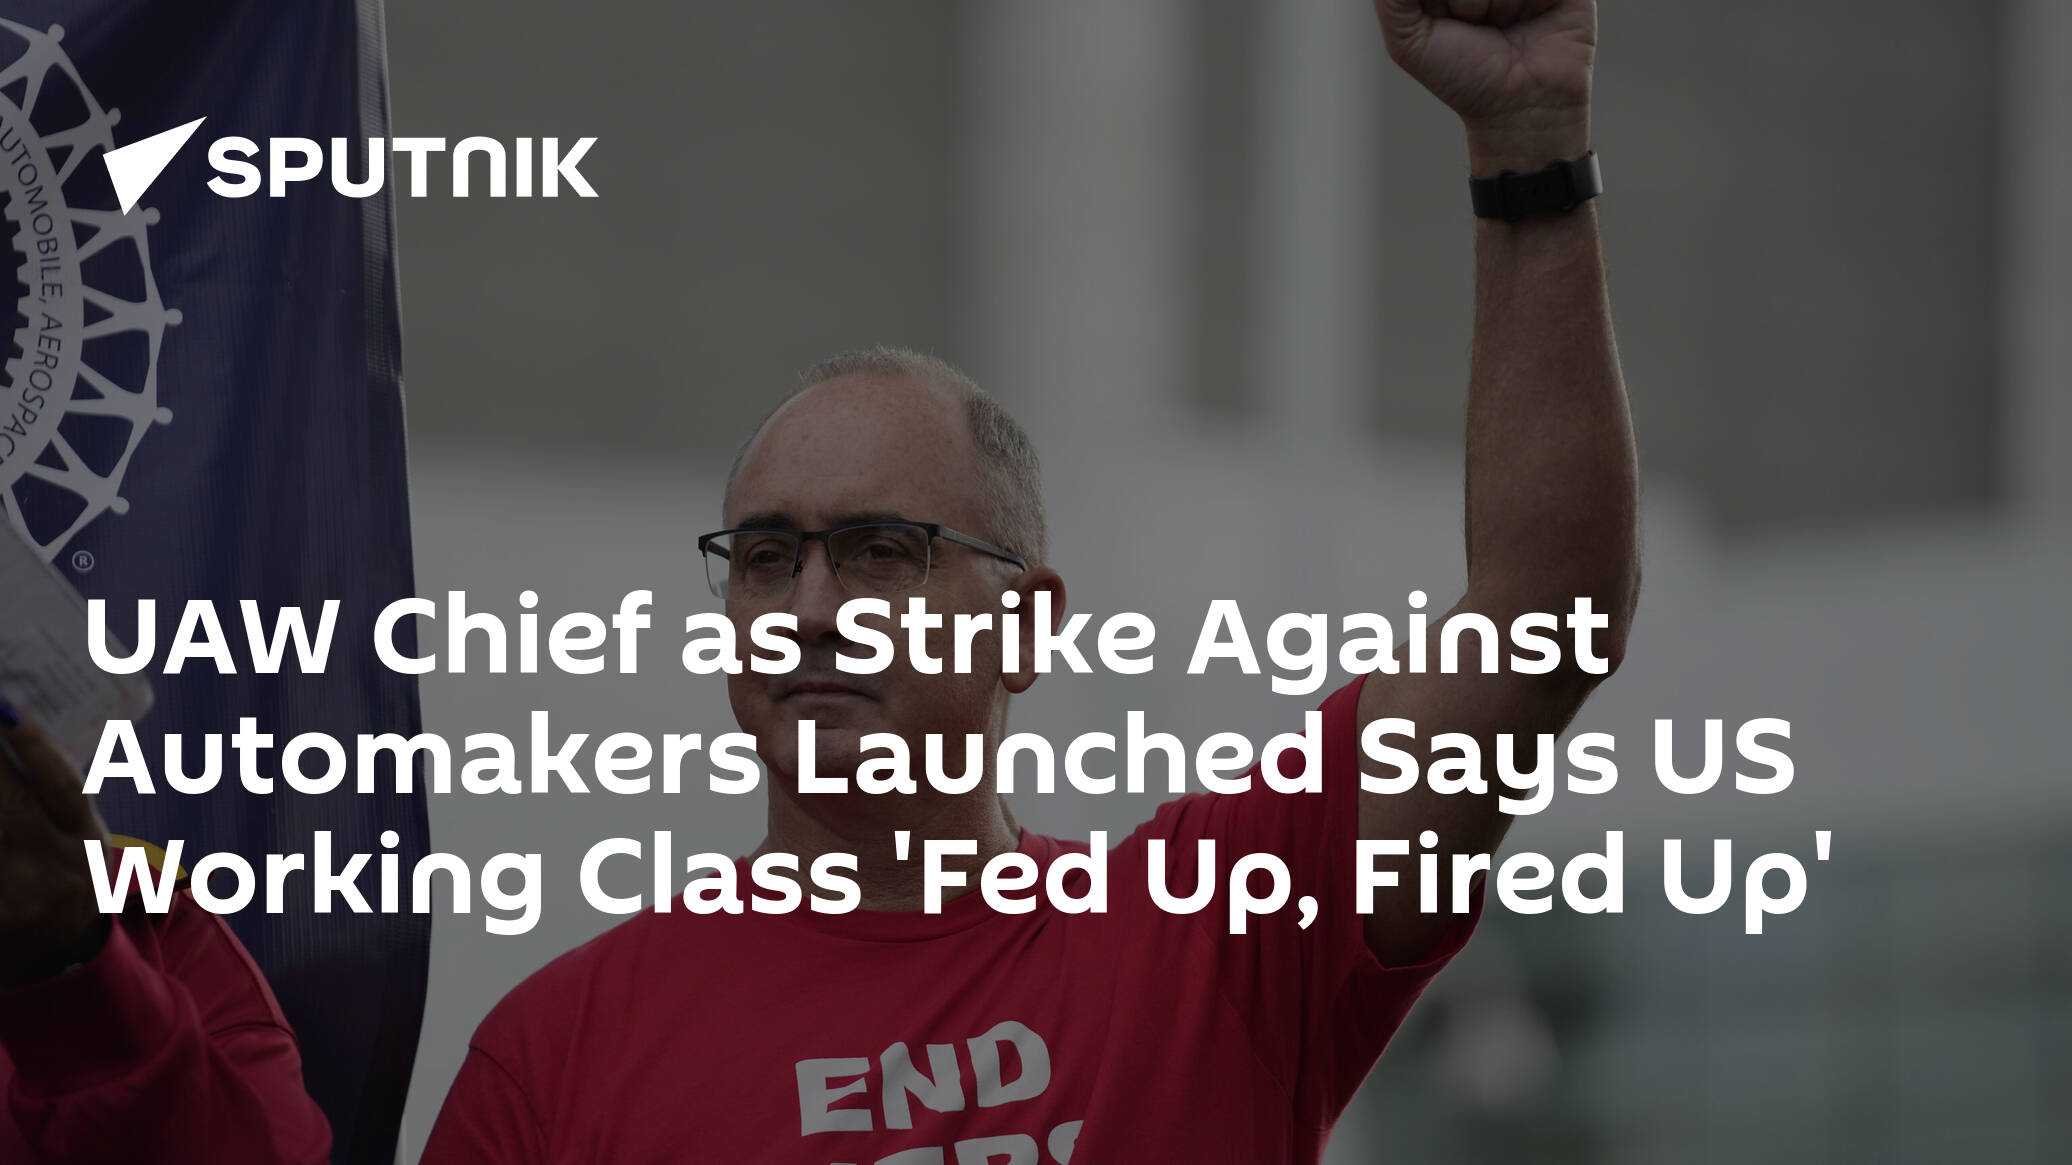 UAW Chief as Strike Against Automakers Launched Says US Working Class 'Fed Up, Fired Up'